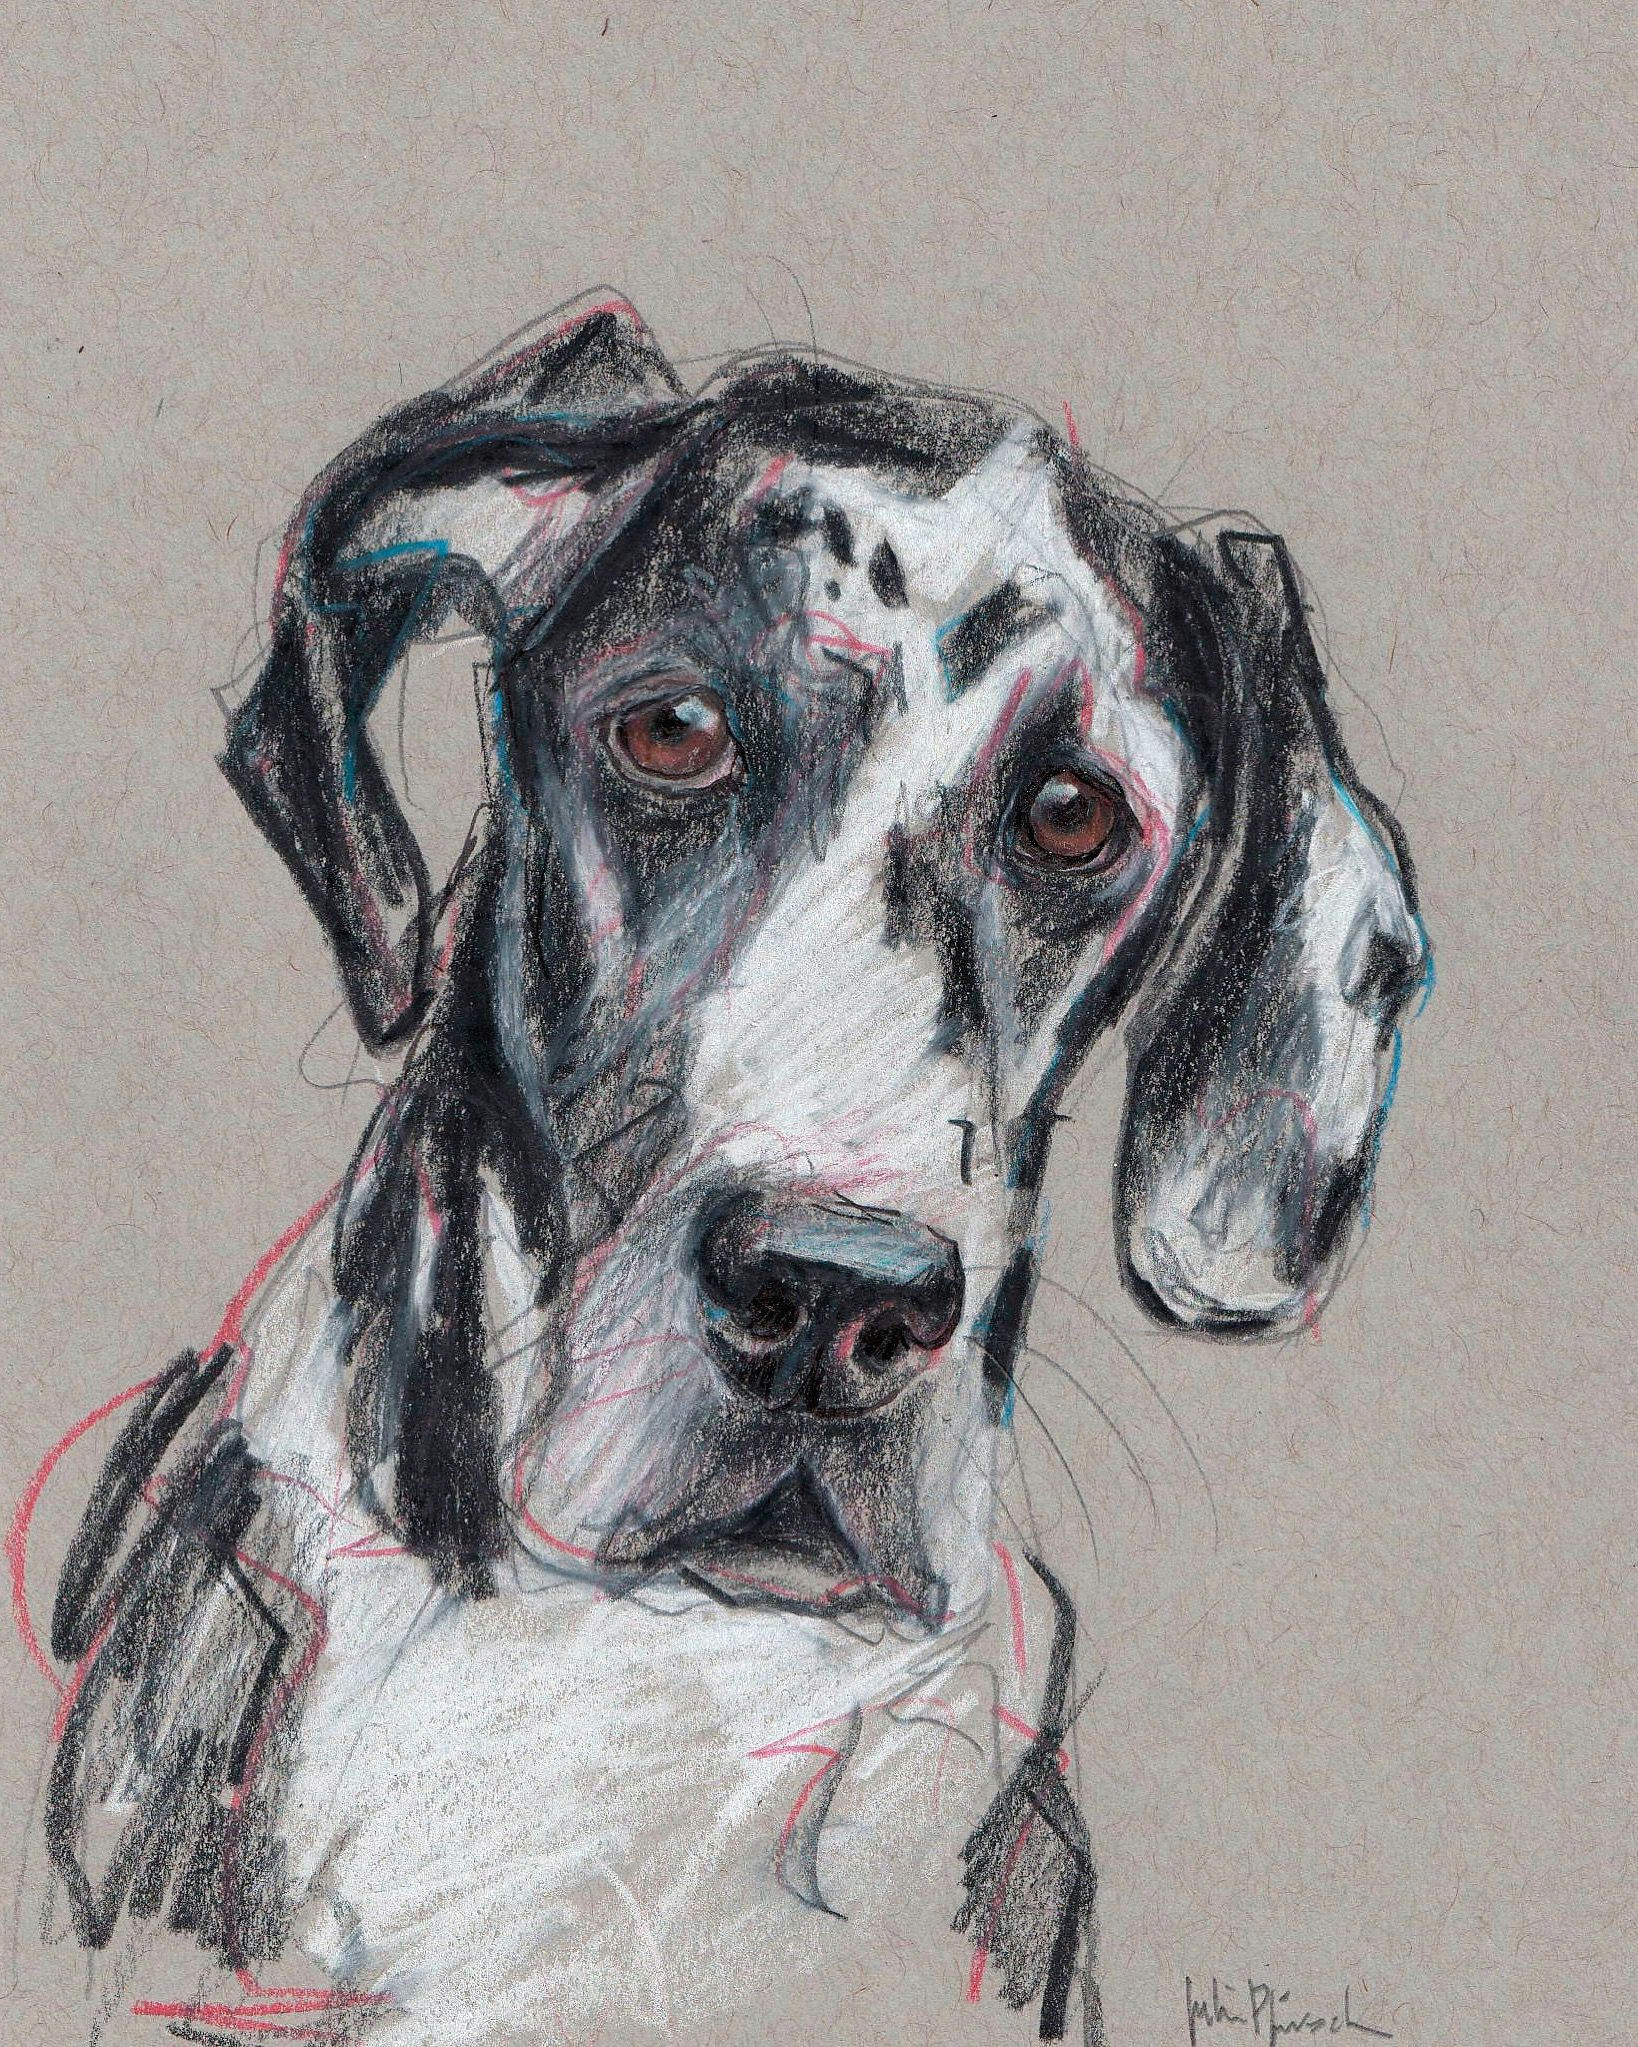 Hand Drawing Of A Dog Spock Pet Portrait Hand Drawn Commission Art by Julie Pfirsch Great